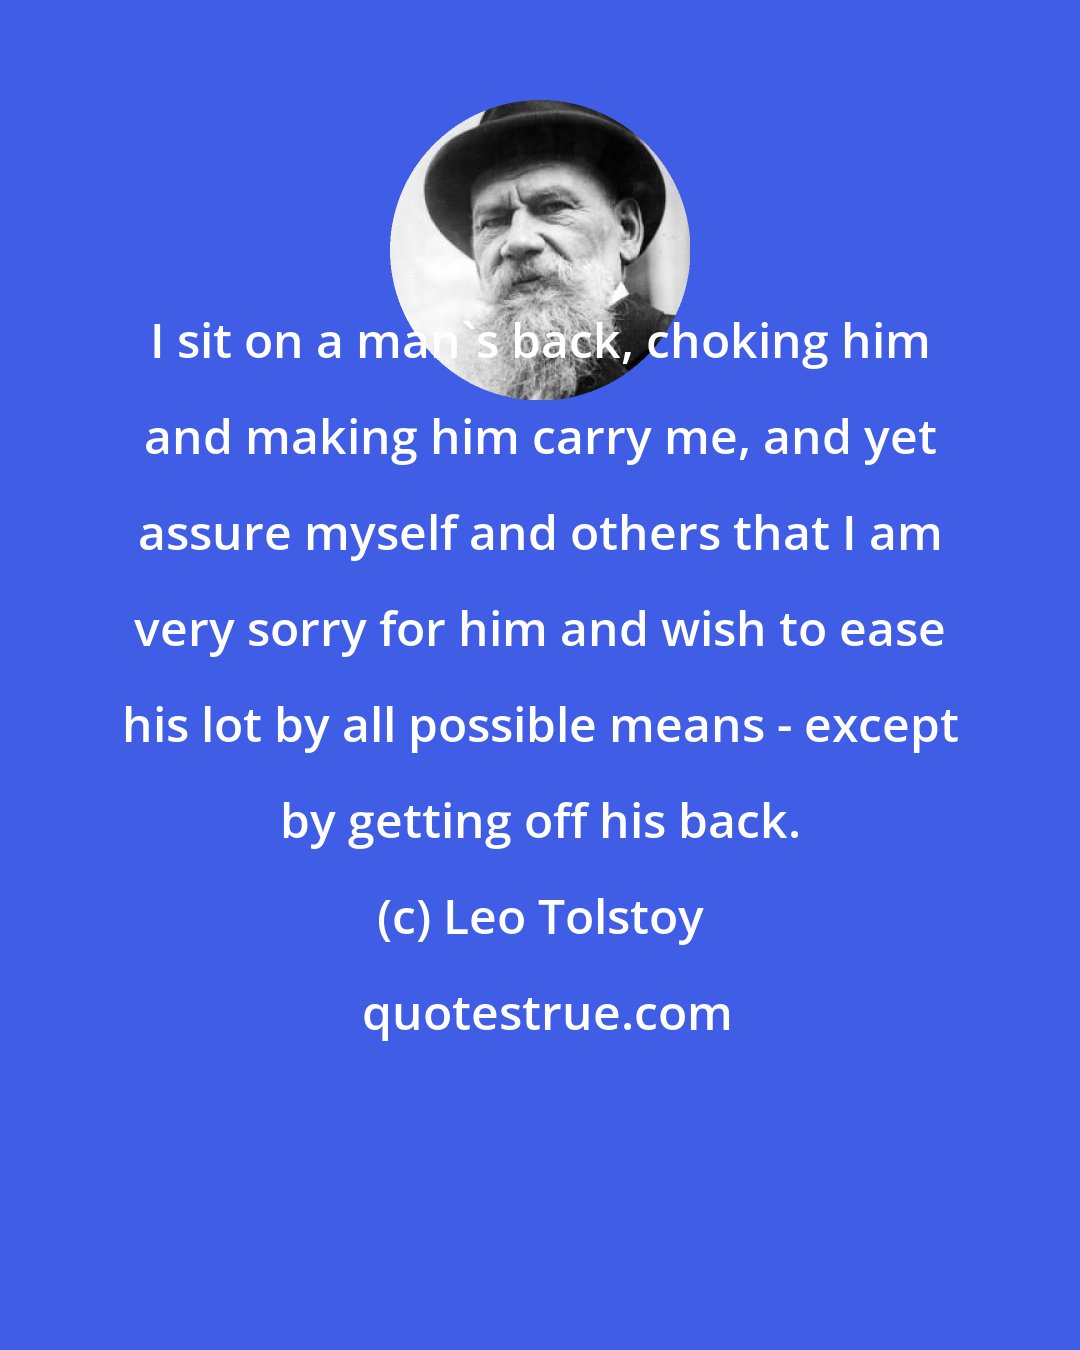 Leo Tolstoy: I sit on a man's back, choking him and making him carry me, and yet assure myself and others that I am very sorry for him and wish to ease his lot by all possible means - except by getting off his back.